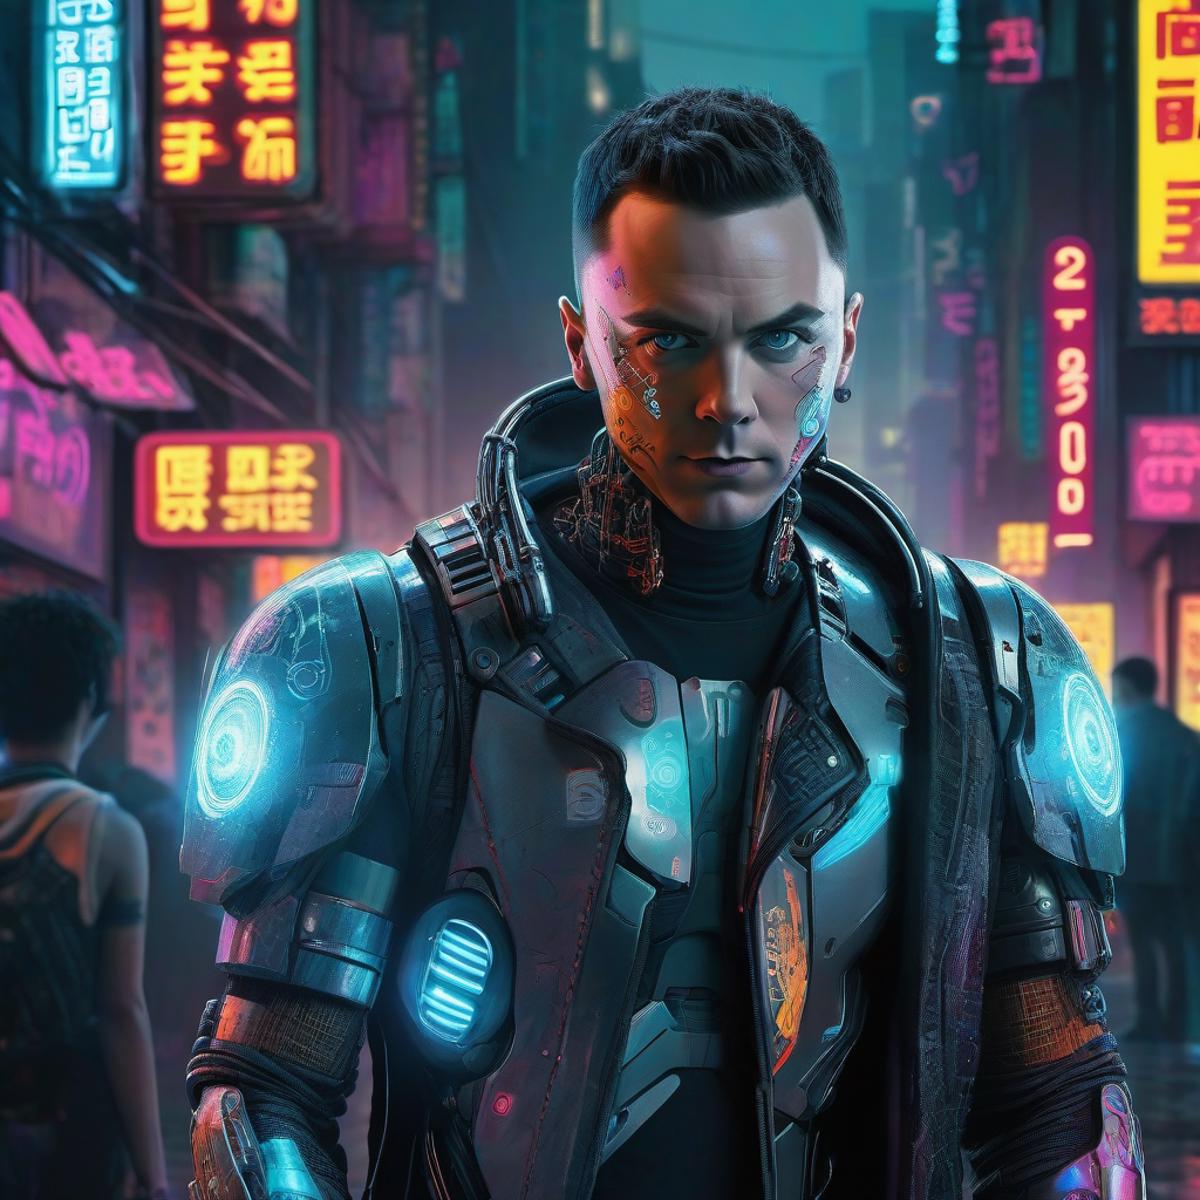 Futuristic Cyborg Man in Black and Silver Suit with Glowing Blue and Orange Orbs on Shoulders, Standing in a City with Neon Signs.